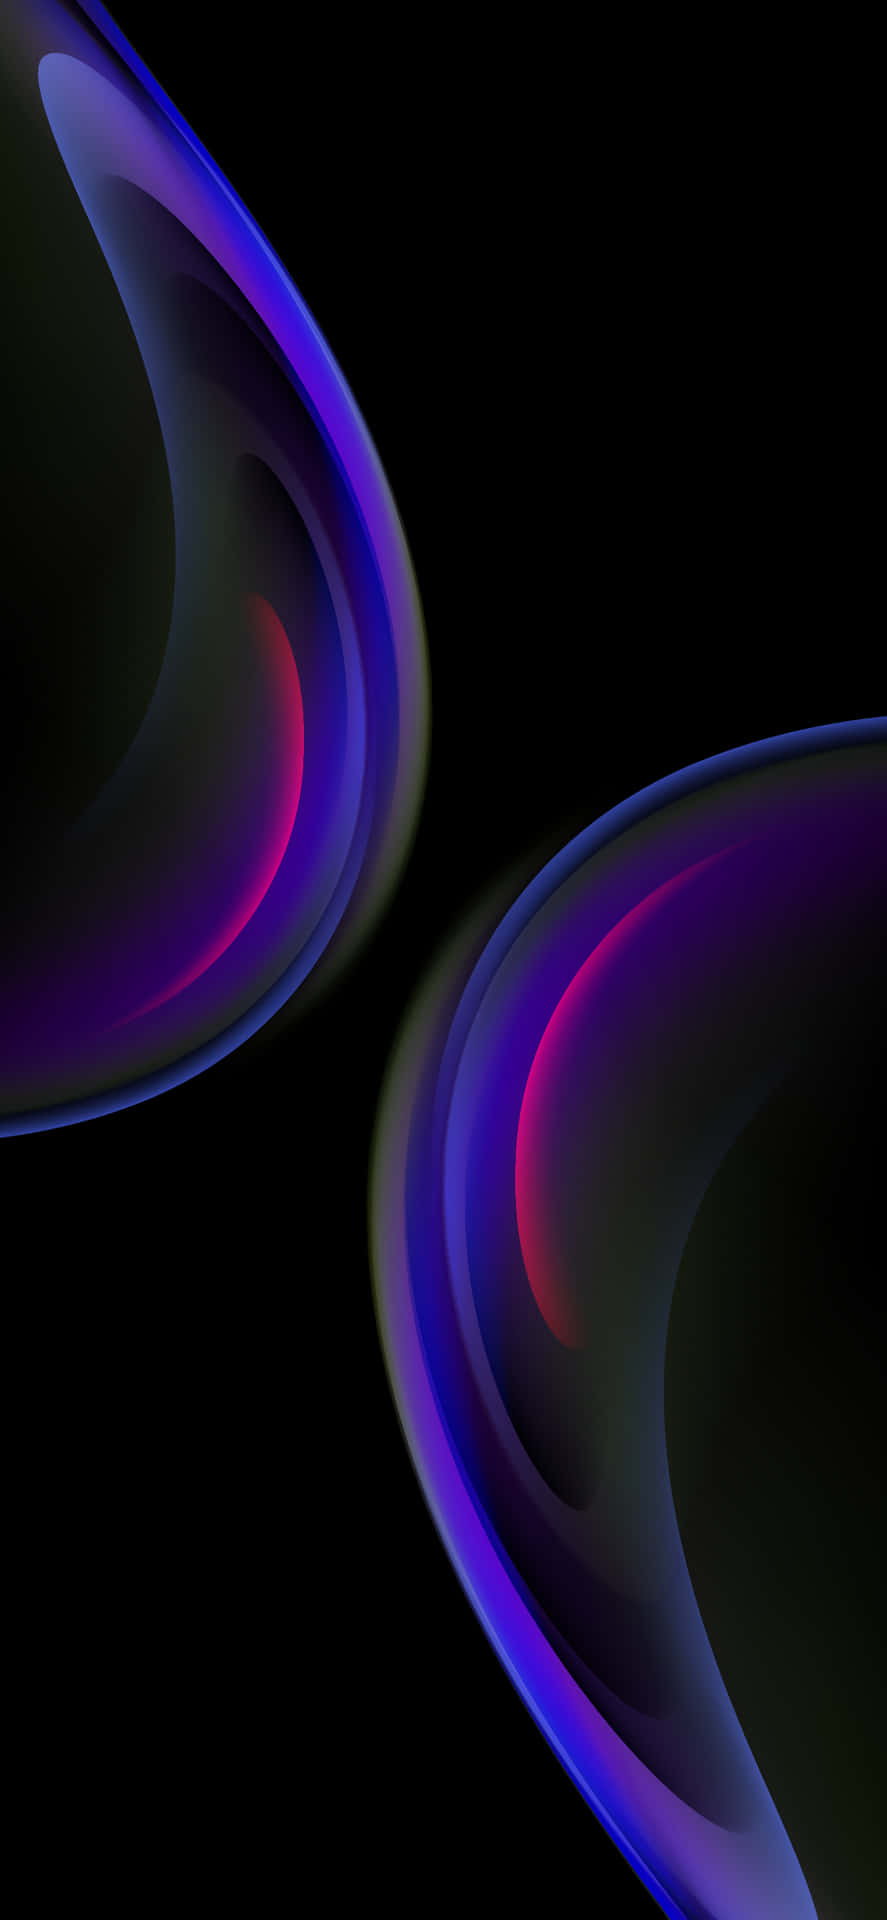 Dive into this Colorful OLED World Wallpaper